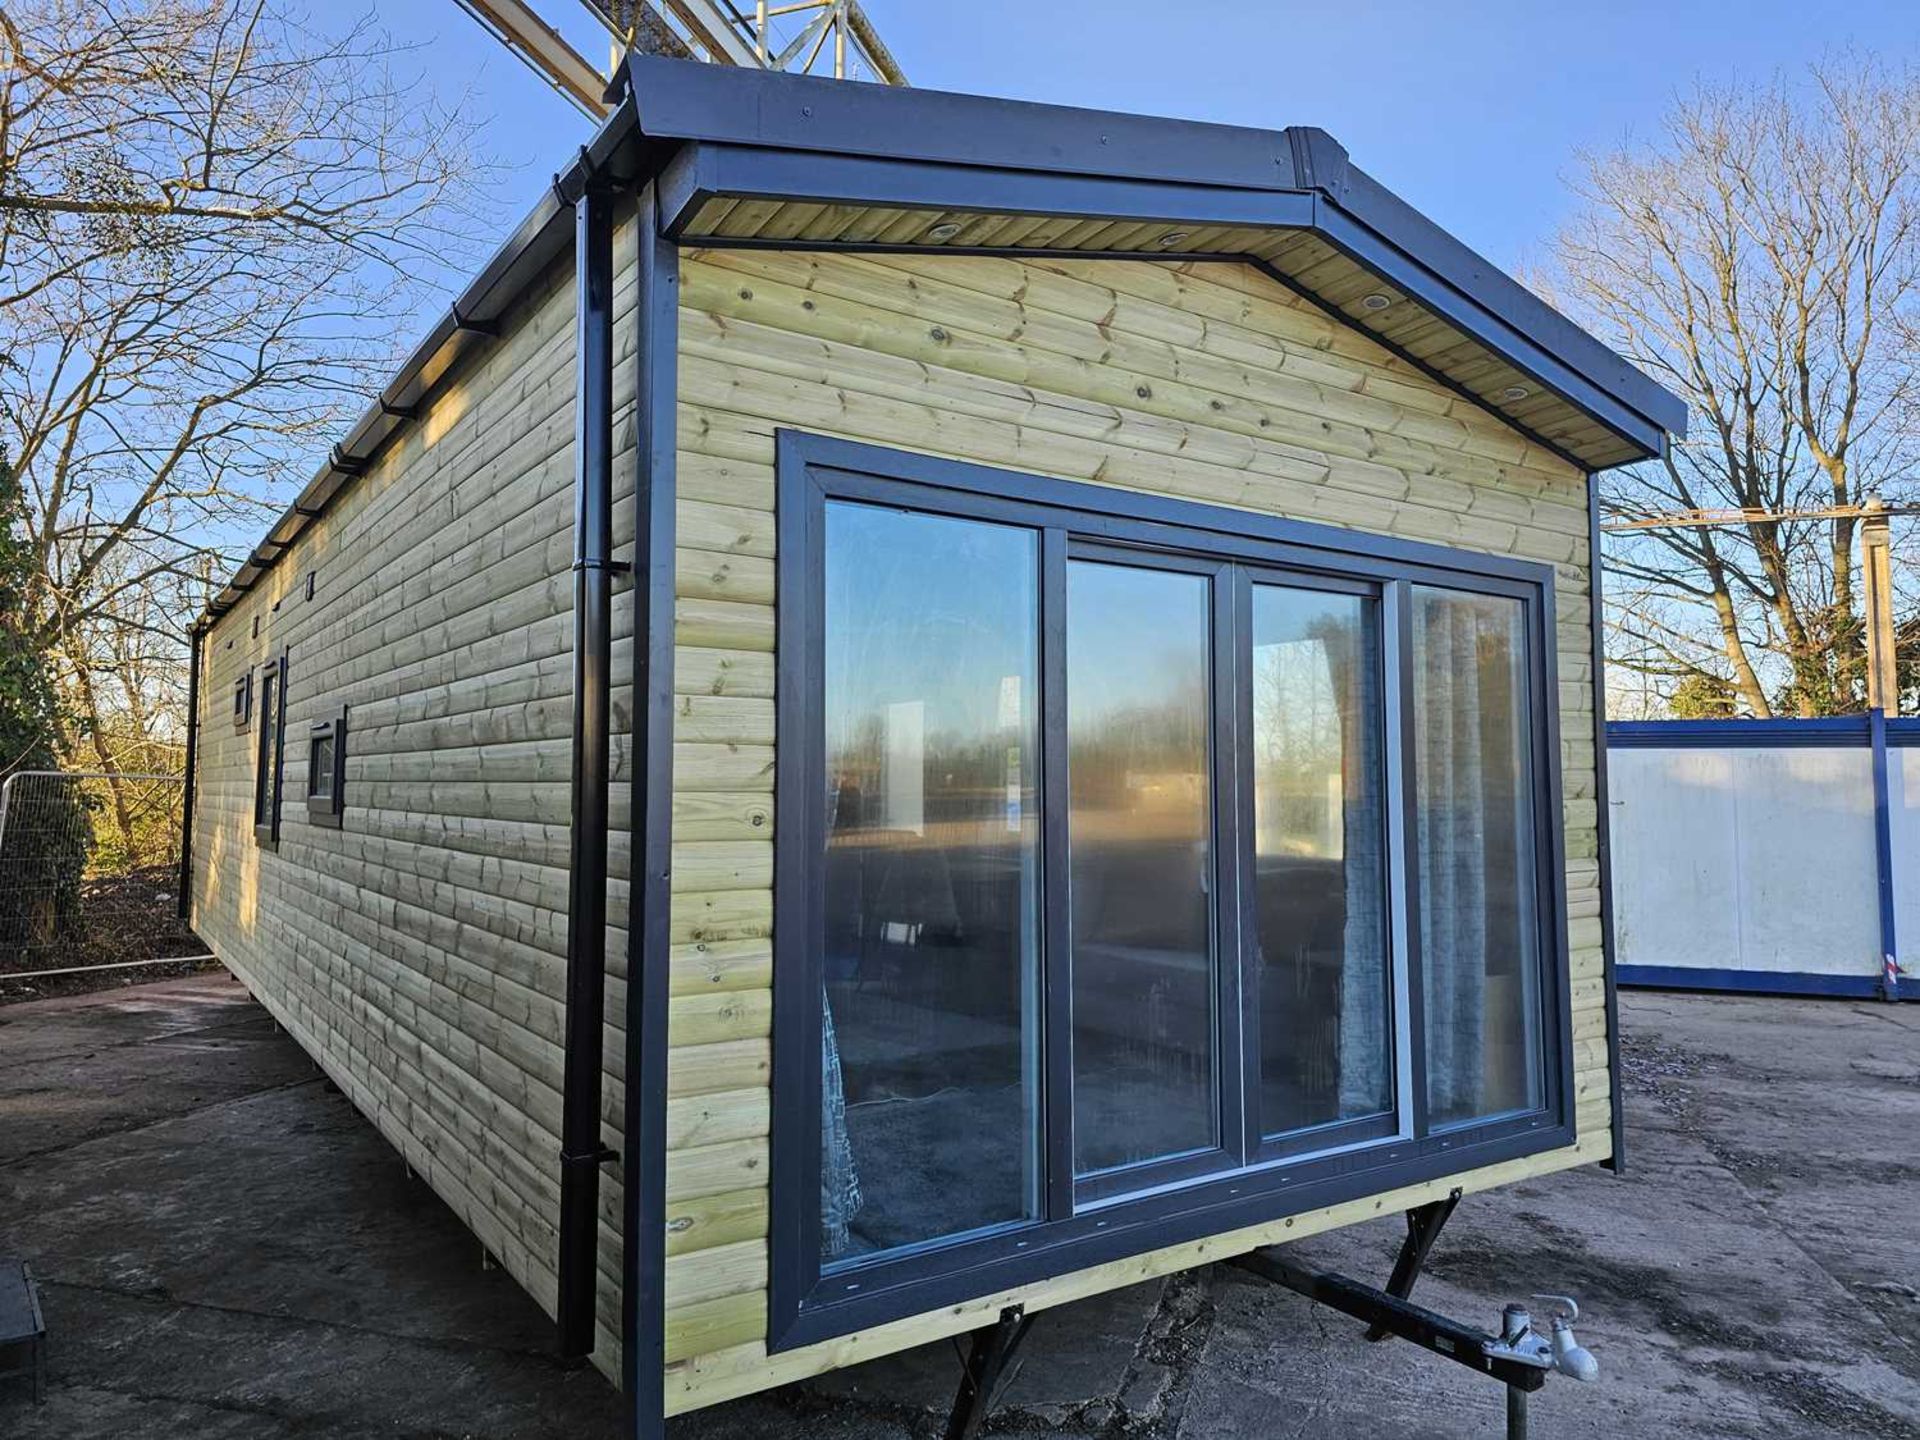 Unused The Steel Holiday Homes Ltd 36' x 12' (Steel Structure) 2 Bedroom Timber Clad Lodge, Shower R - Image 4 of 23